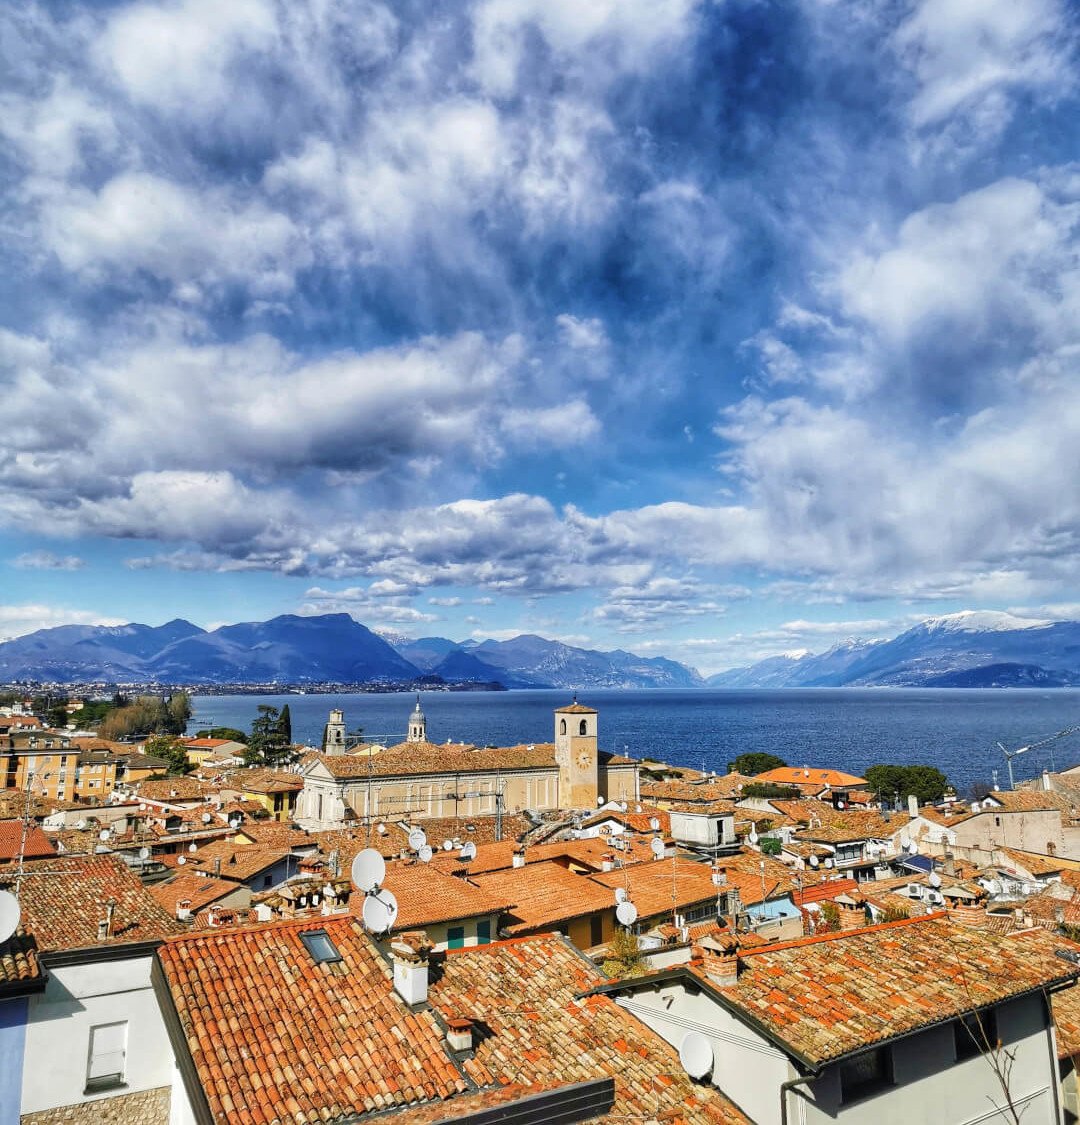 Three things to see in Desenzano